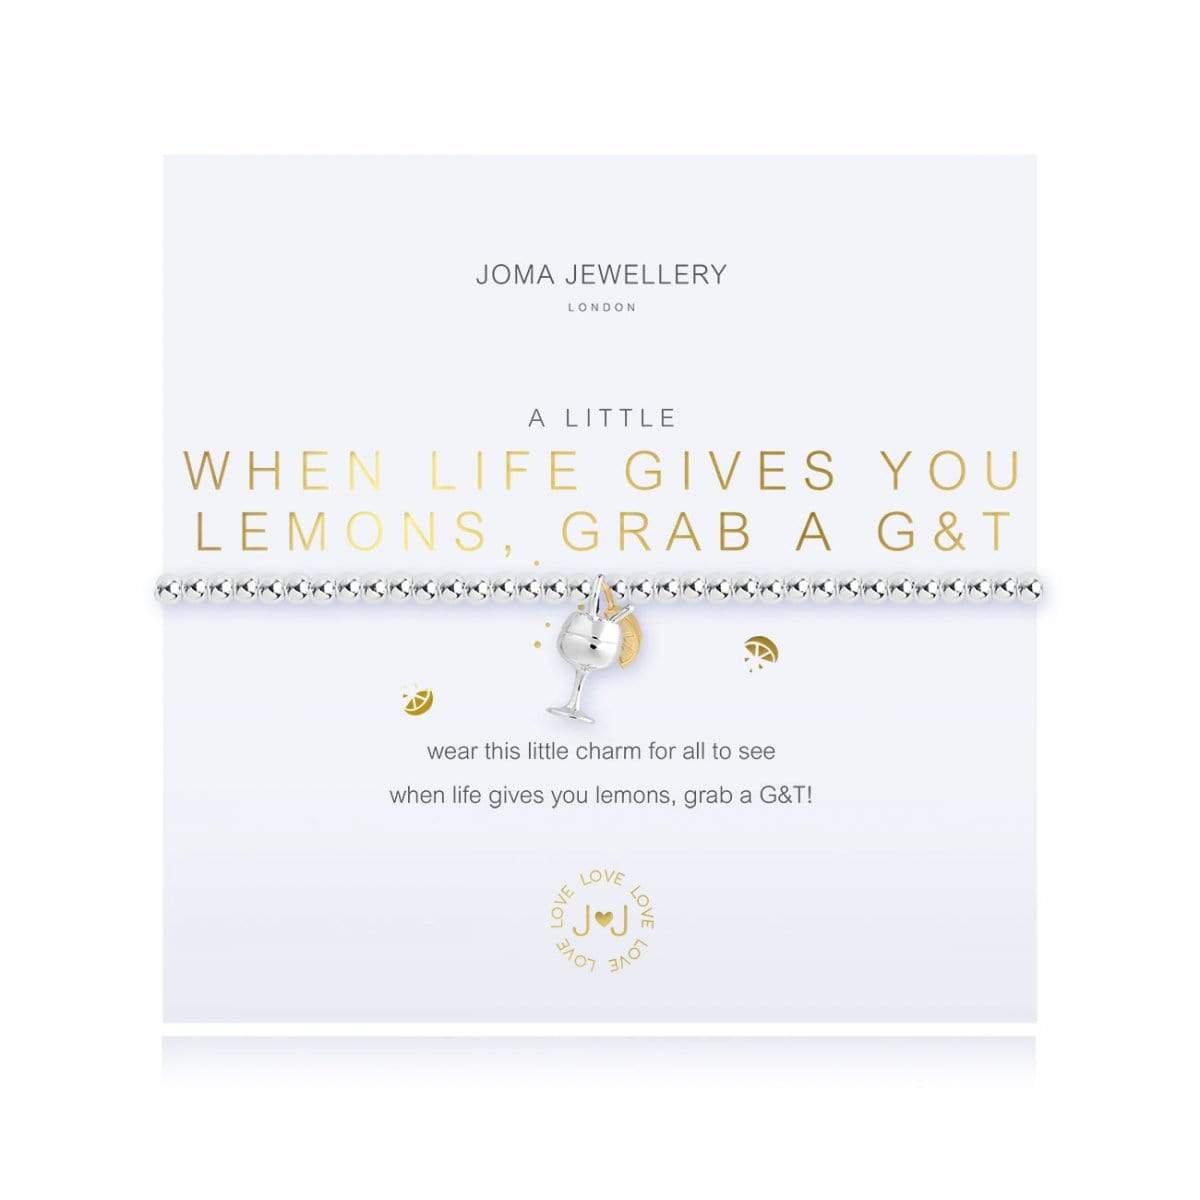 Joma Jewellery Bracelet Joma Jewellery Bracelet - When life gives you lemons, grab a G&T